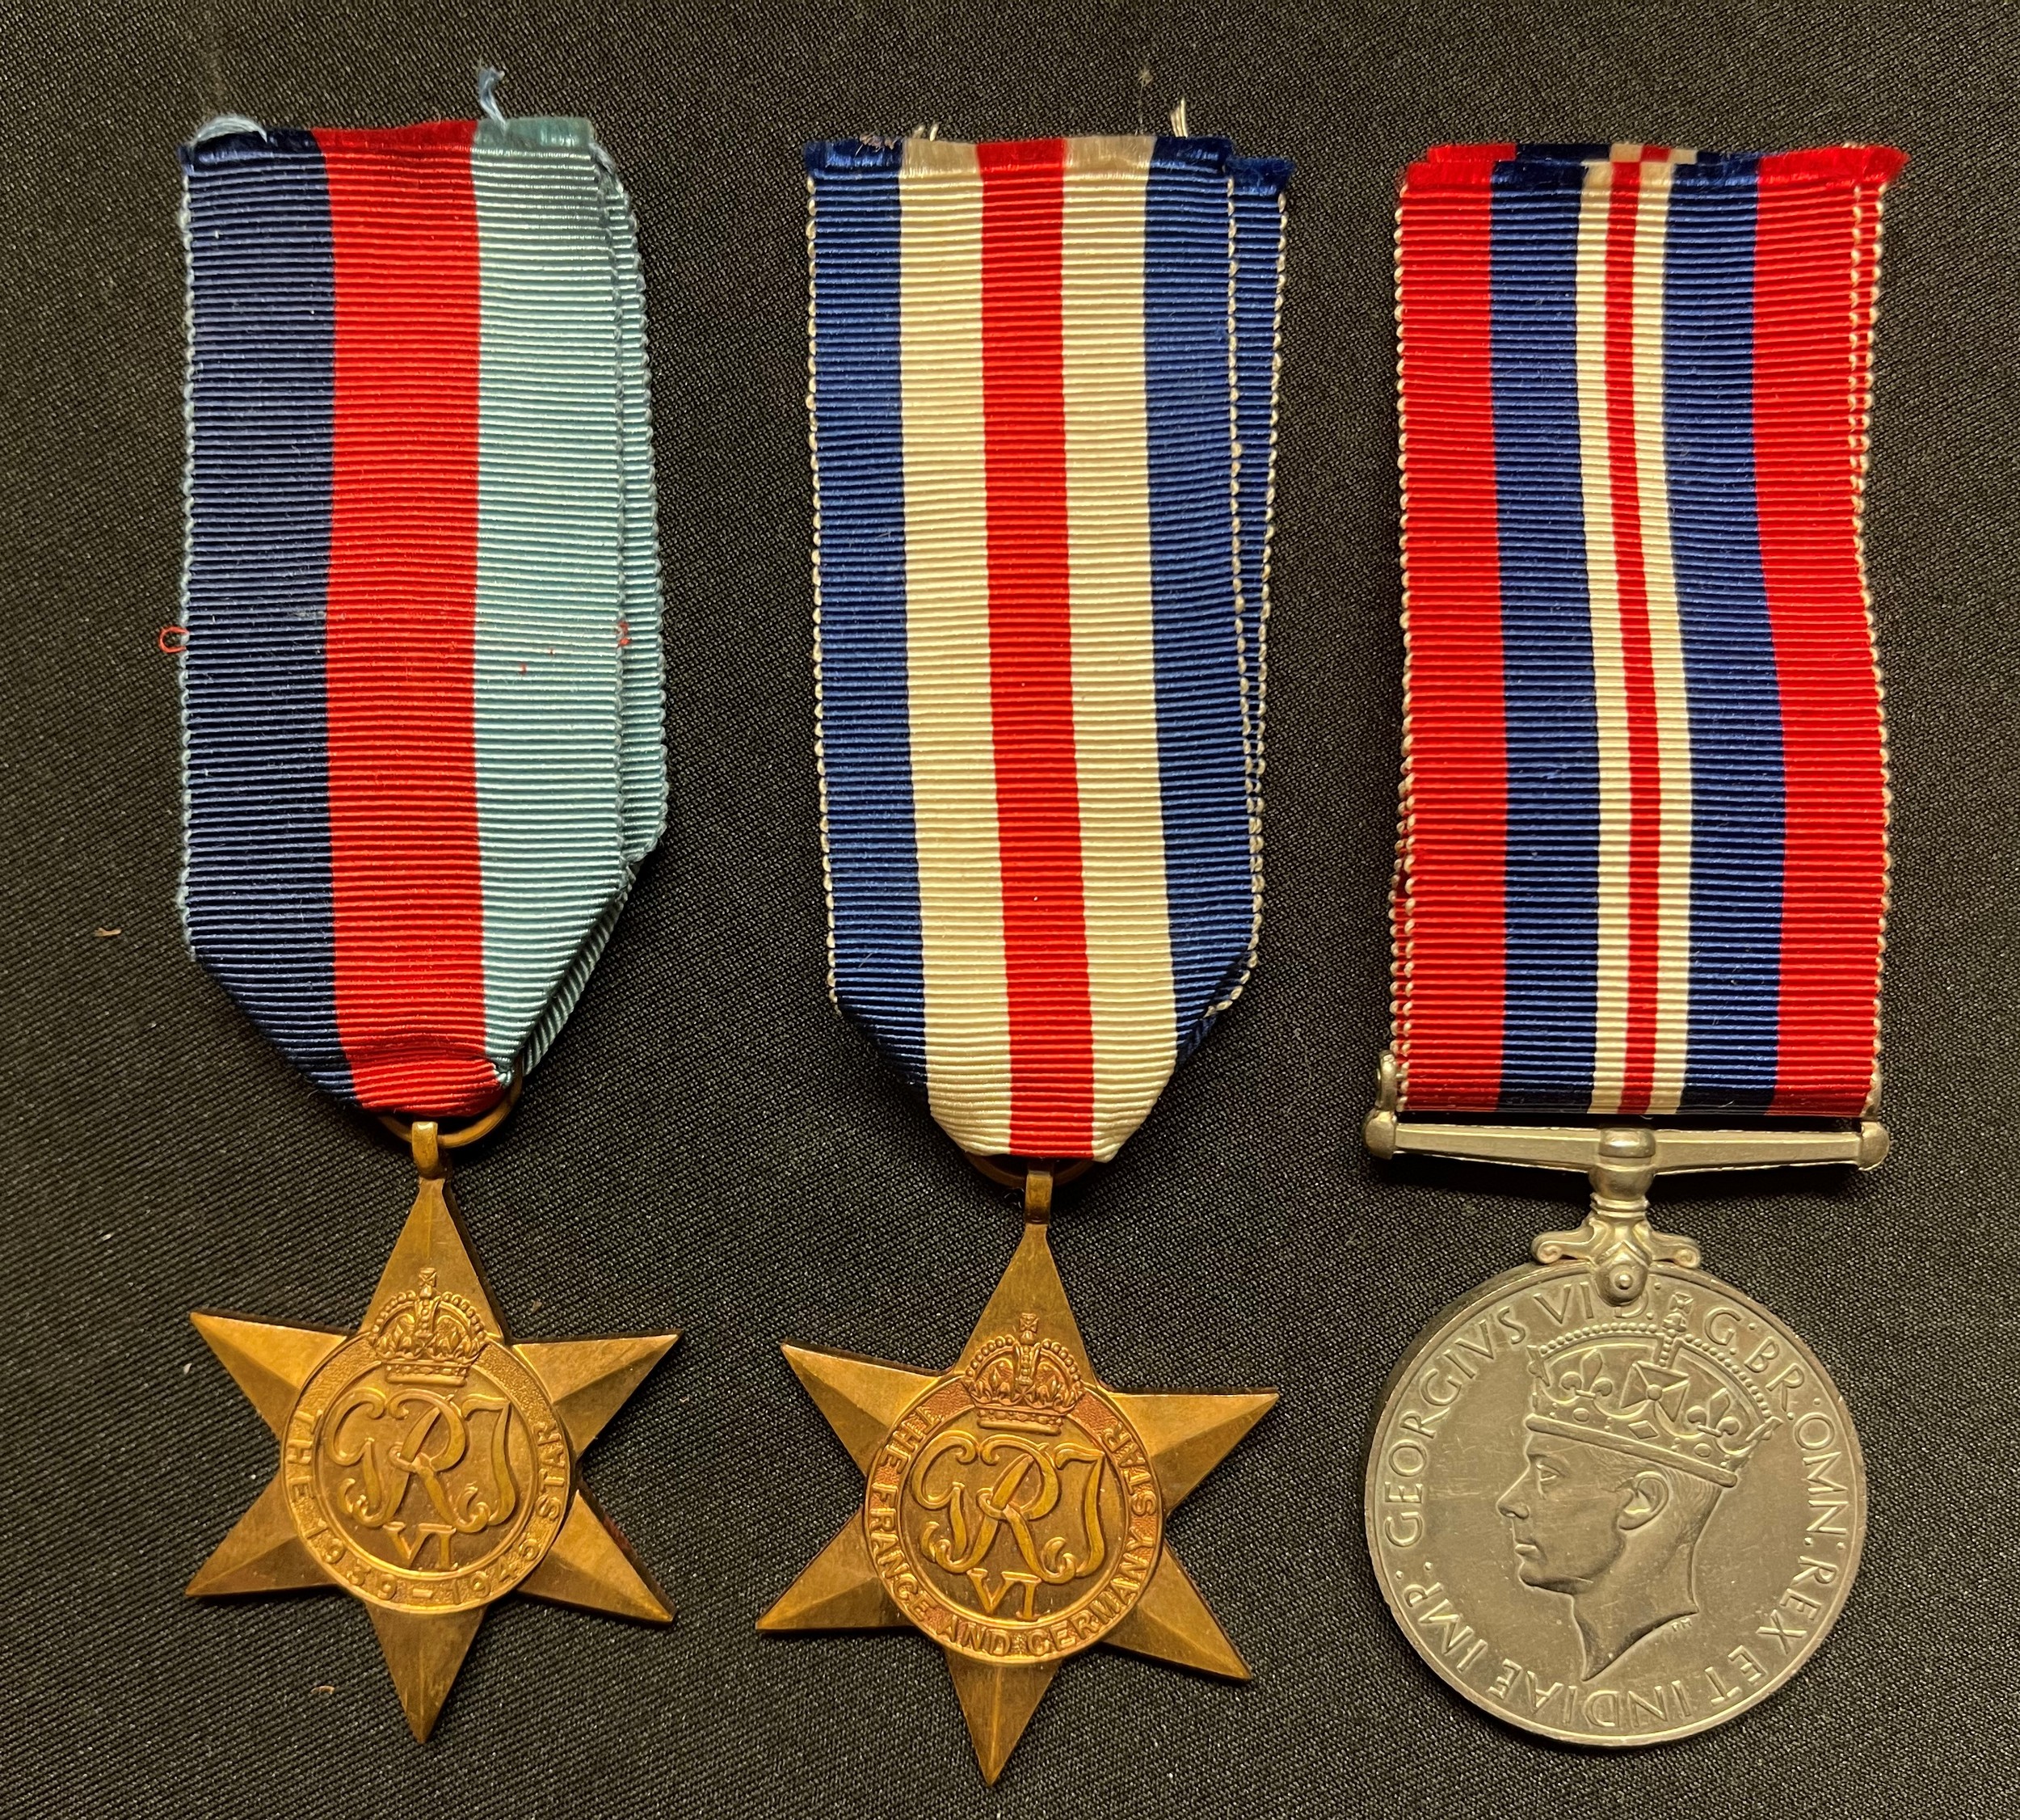 WW2 British medal group comprising of 1939-45 Star, France & Germany Star, War Medal. All with - Image 2 of 3